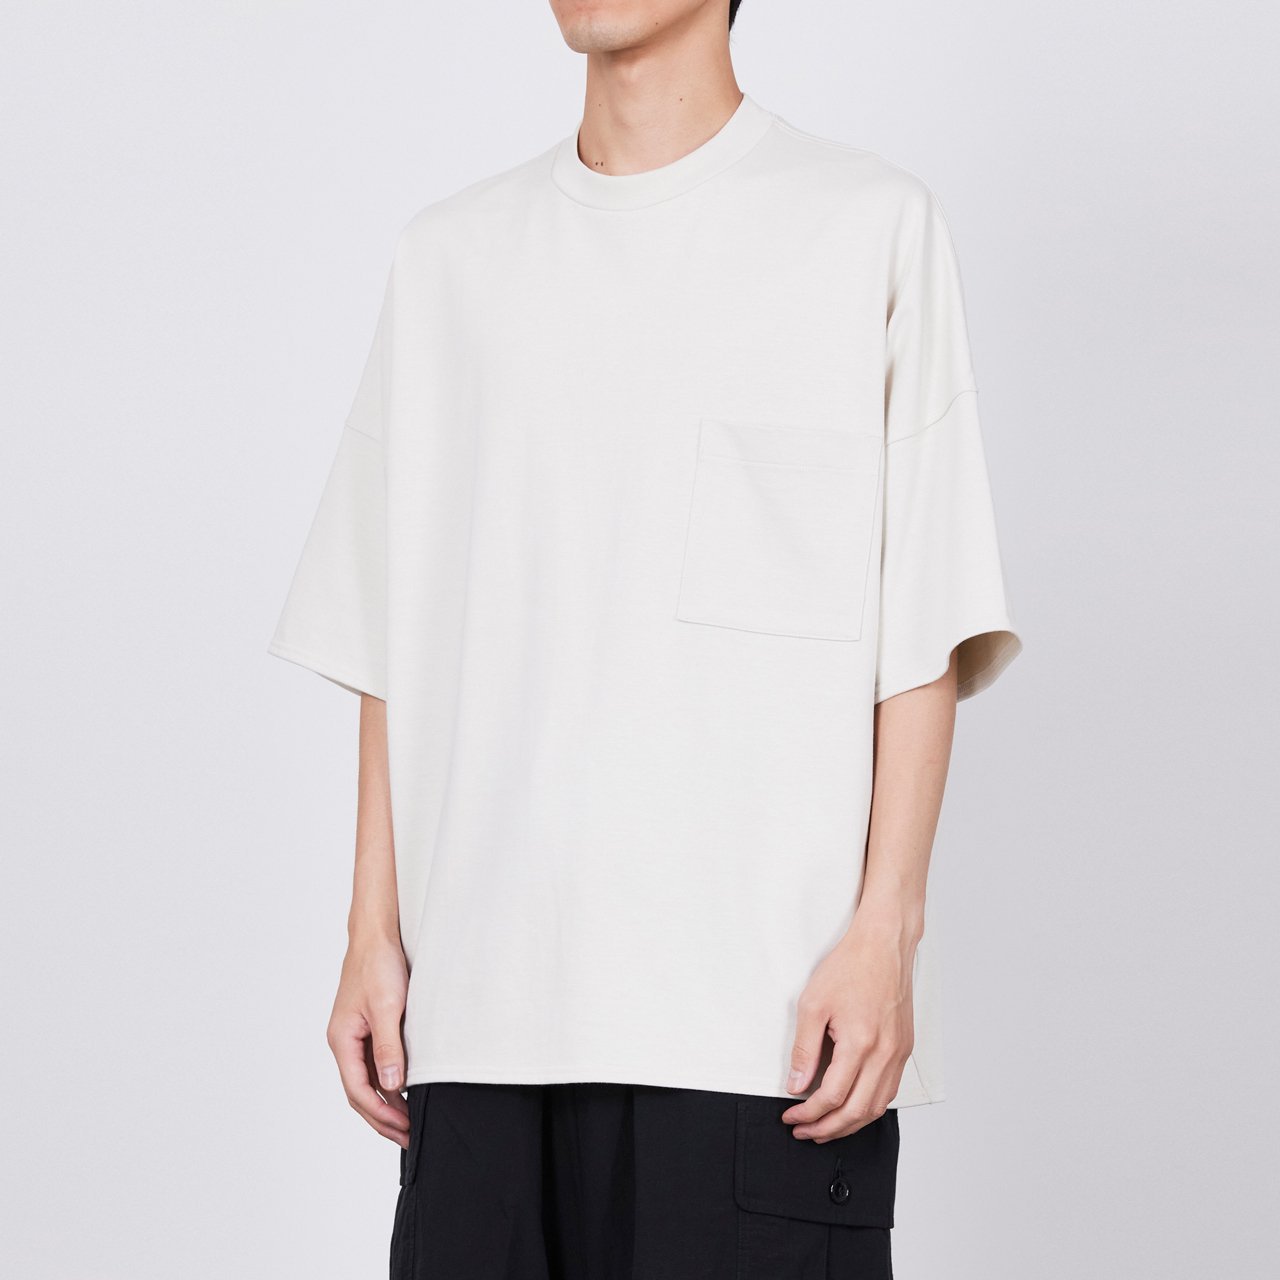 <img class='new_mark_img1' src='https://img.shop-pro.jp/img/new/icons5.gif' style='border:none;display:inline;margin:0px;padding:0px;width:auto;' />marka (ޡ)POCKET TEE OFF WHITE -20//1 RECYCLE SUVIN ORGANIAC COTTON KNIT-